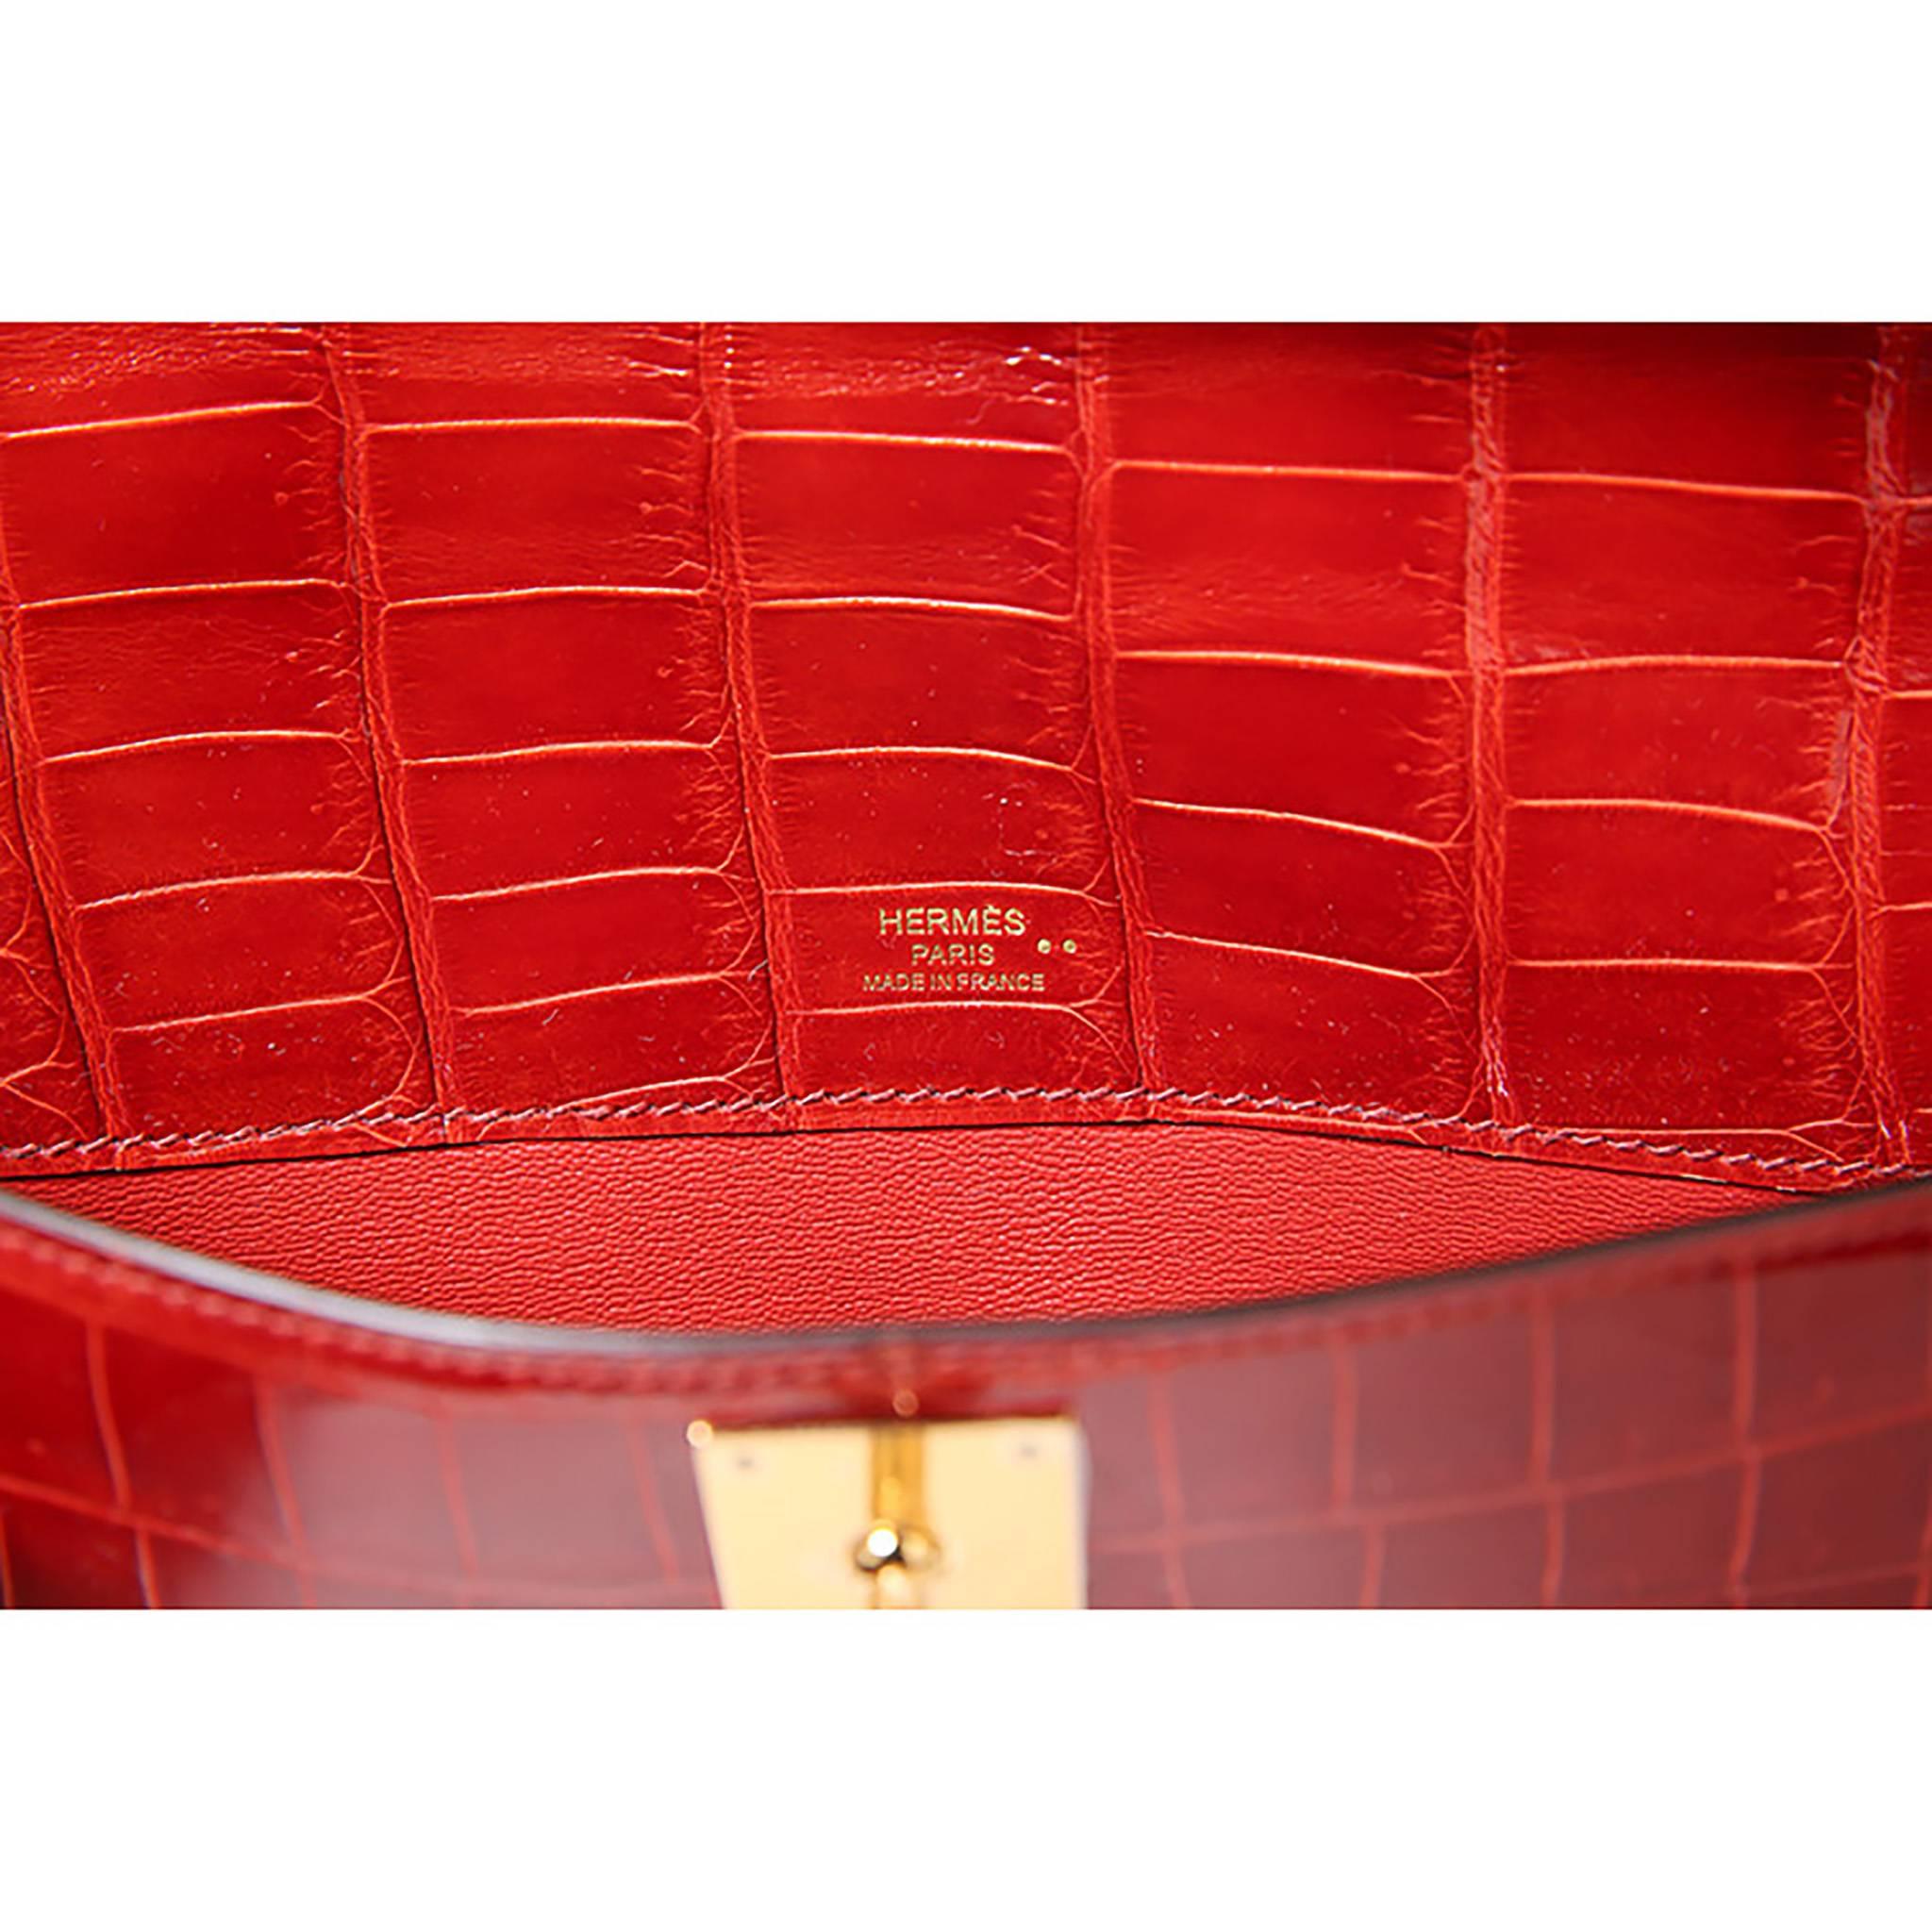 Hermes Kelly Cut Crocodilus Niloticus Leather Red Color GHW 4